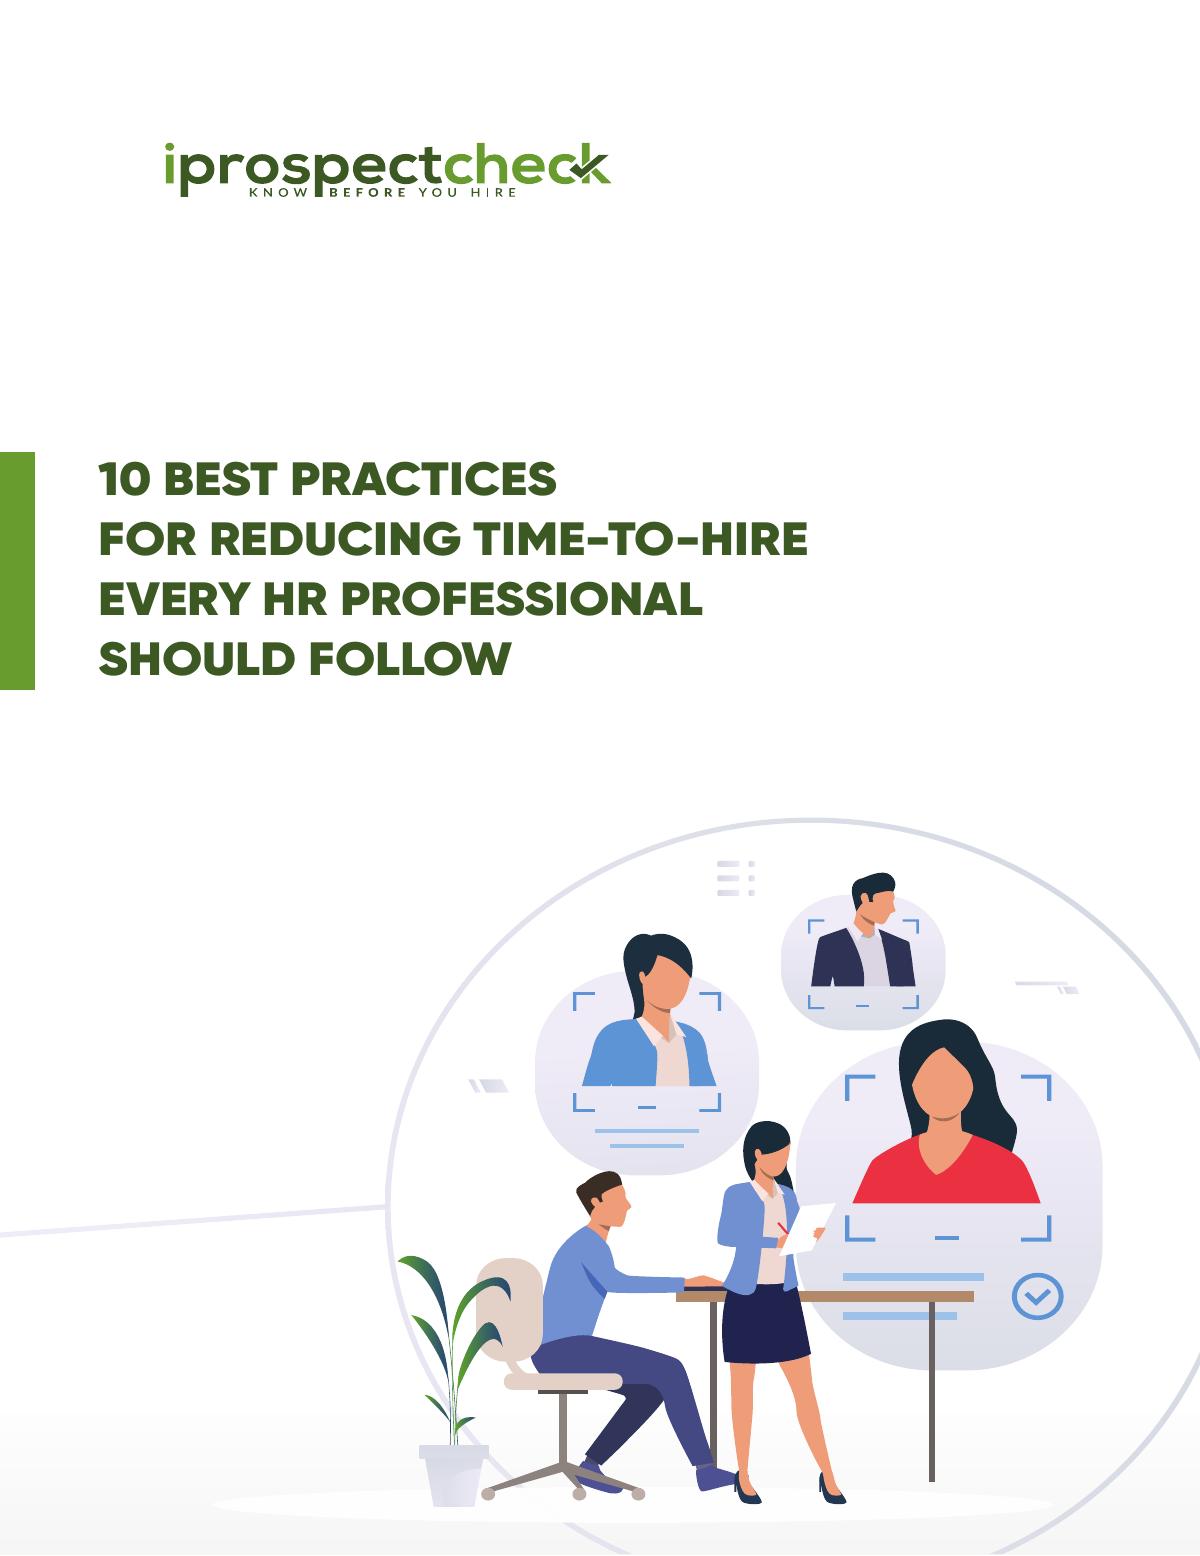 10 Best Practices for Reducing Time-to-Hire Every HR Professional Should Follow